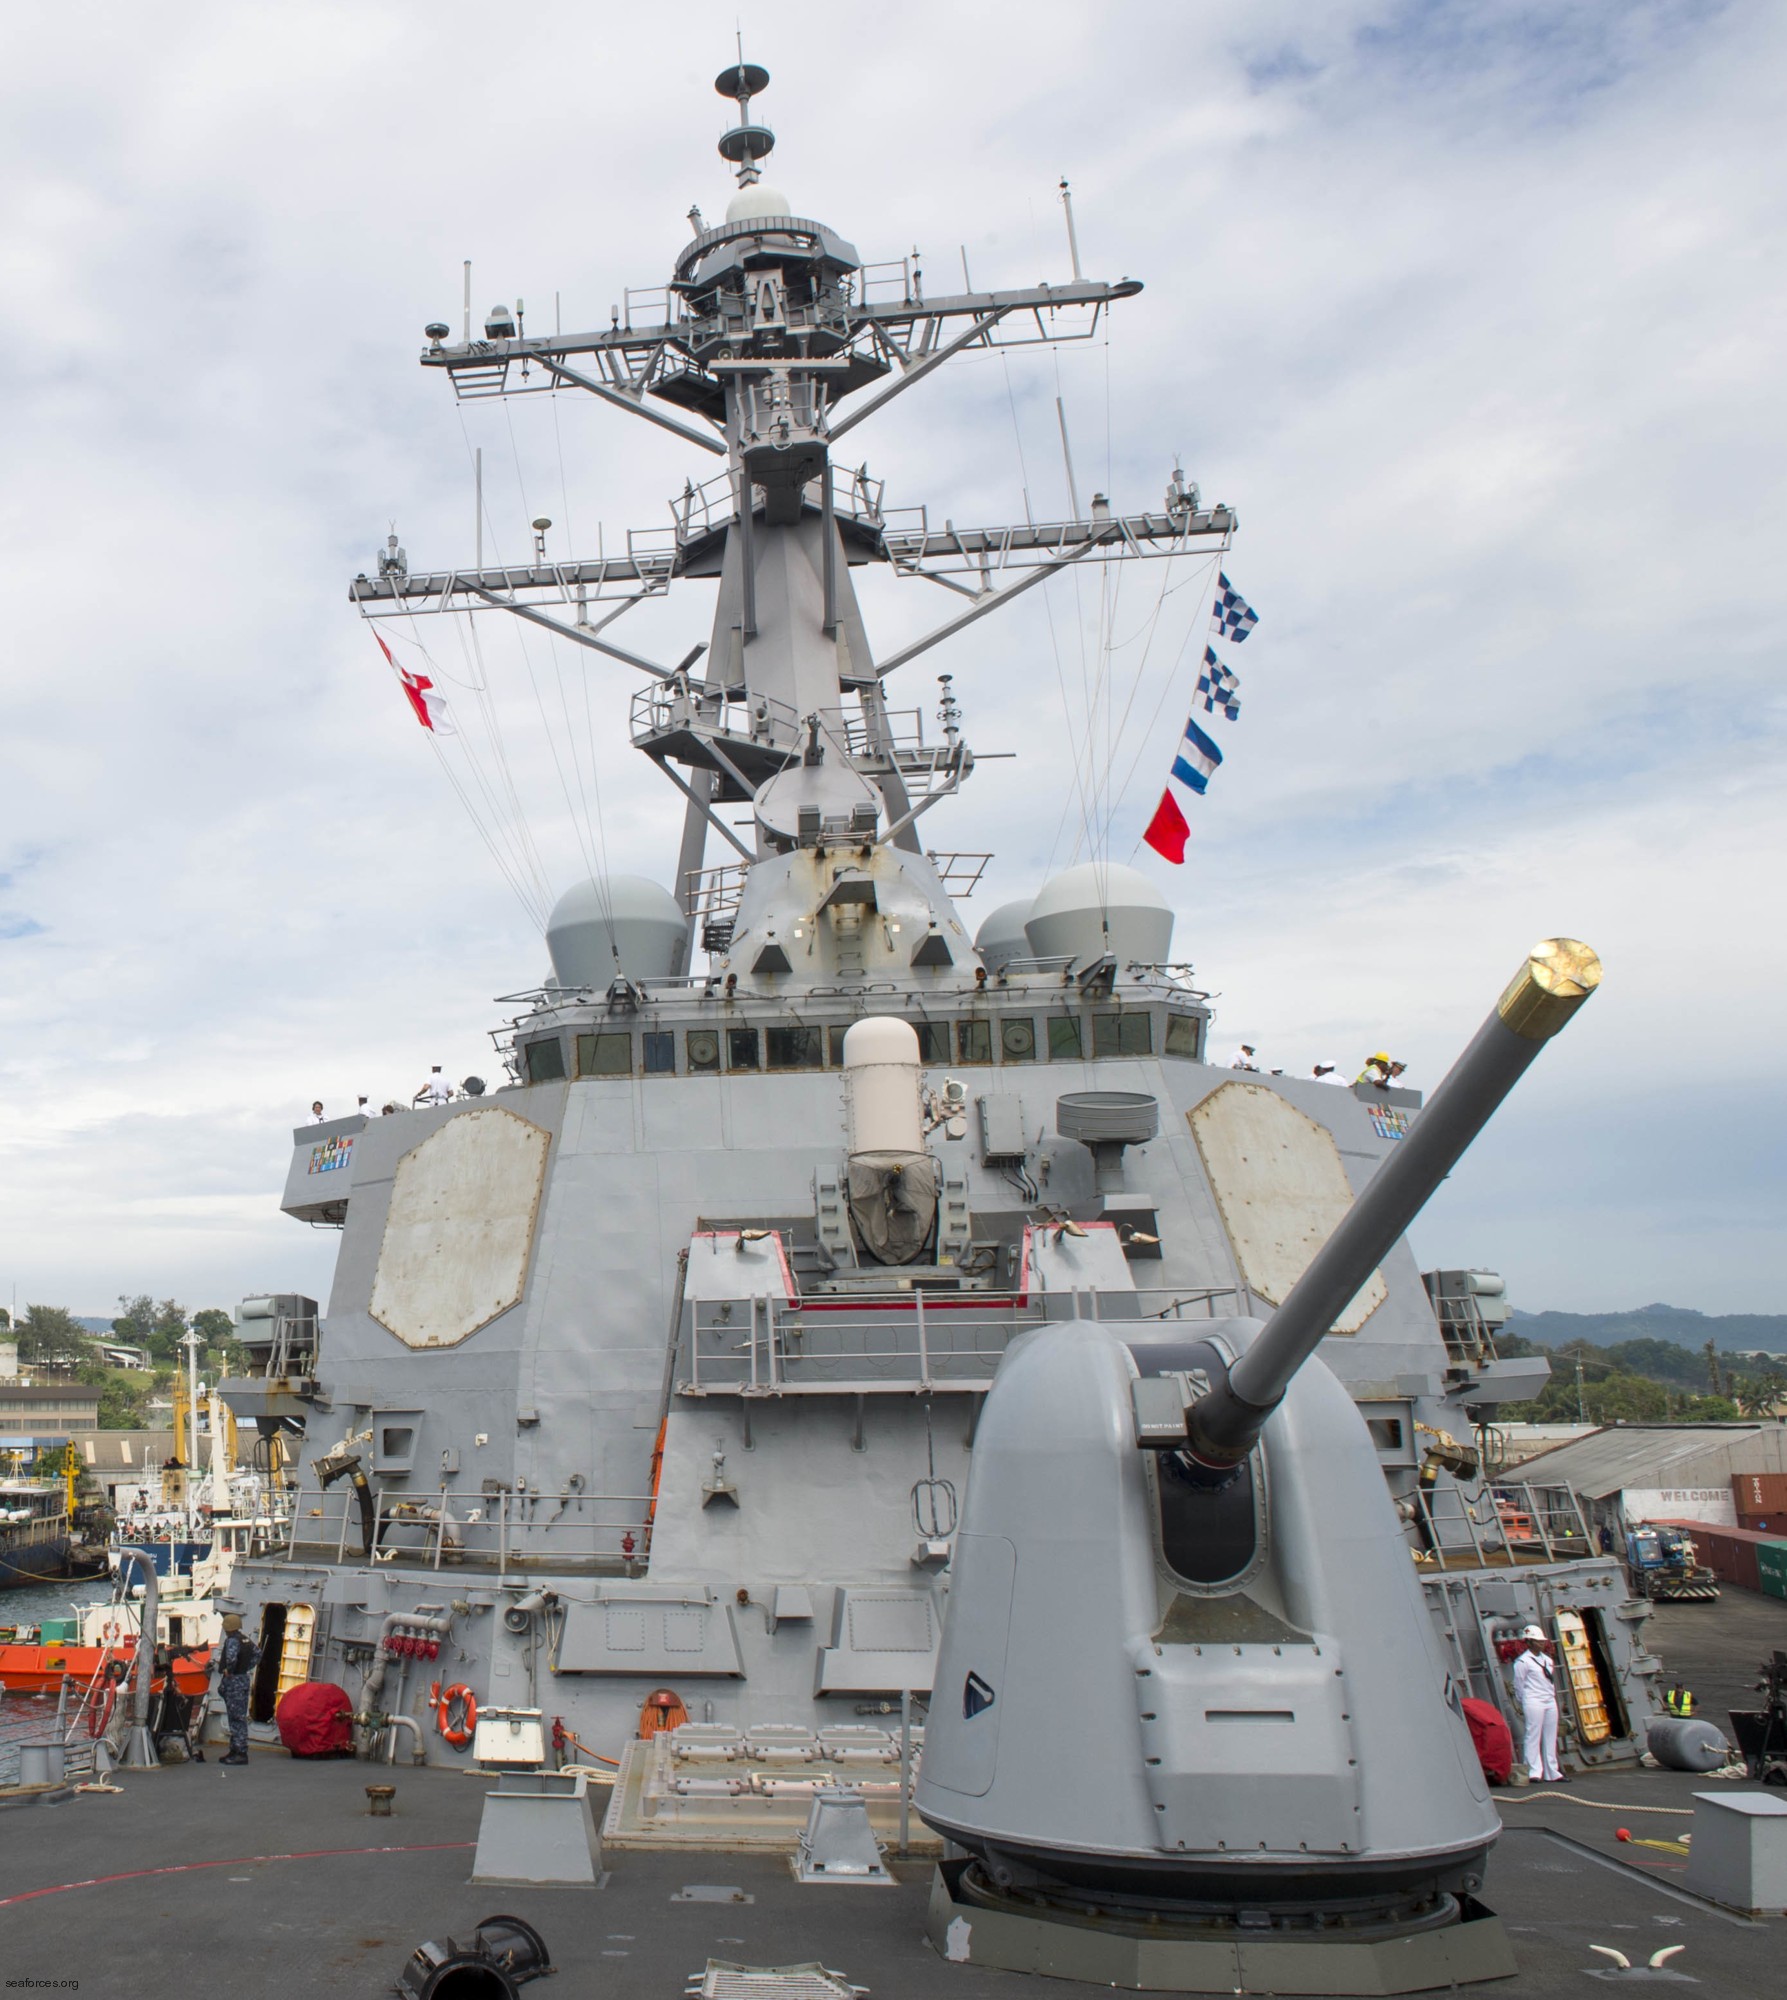 ddg-52 uss barry arleigh burke class guided missile destroyer us navy 111 guadalcanal